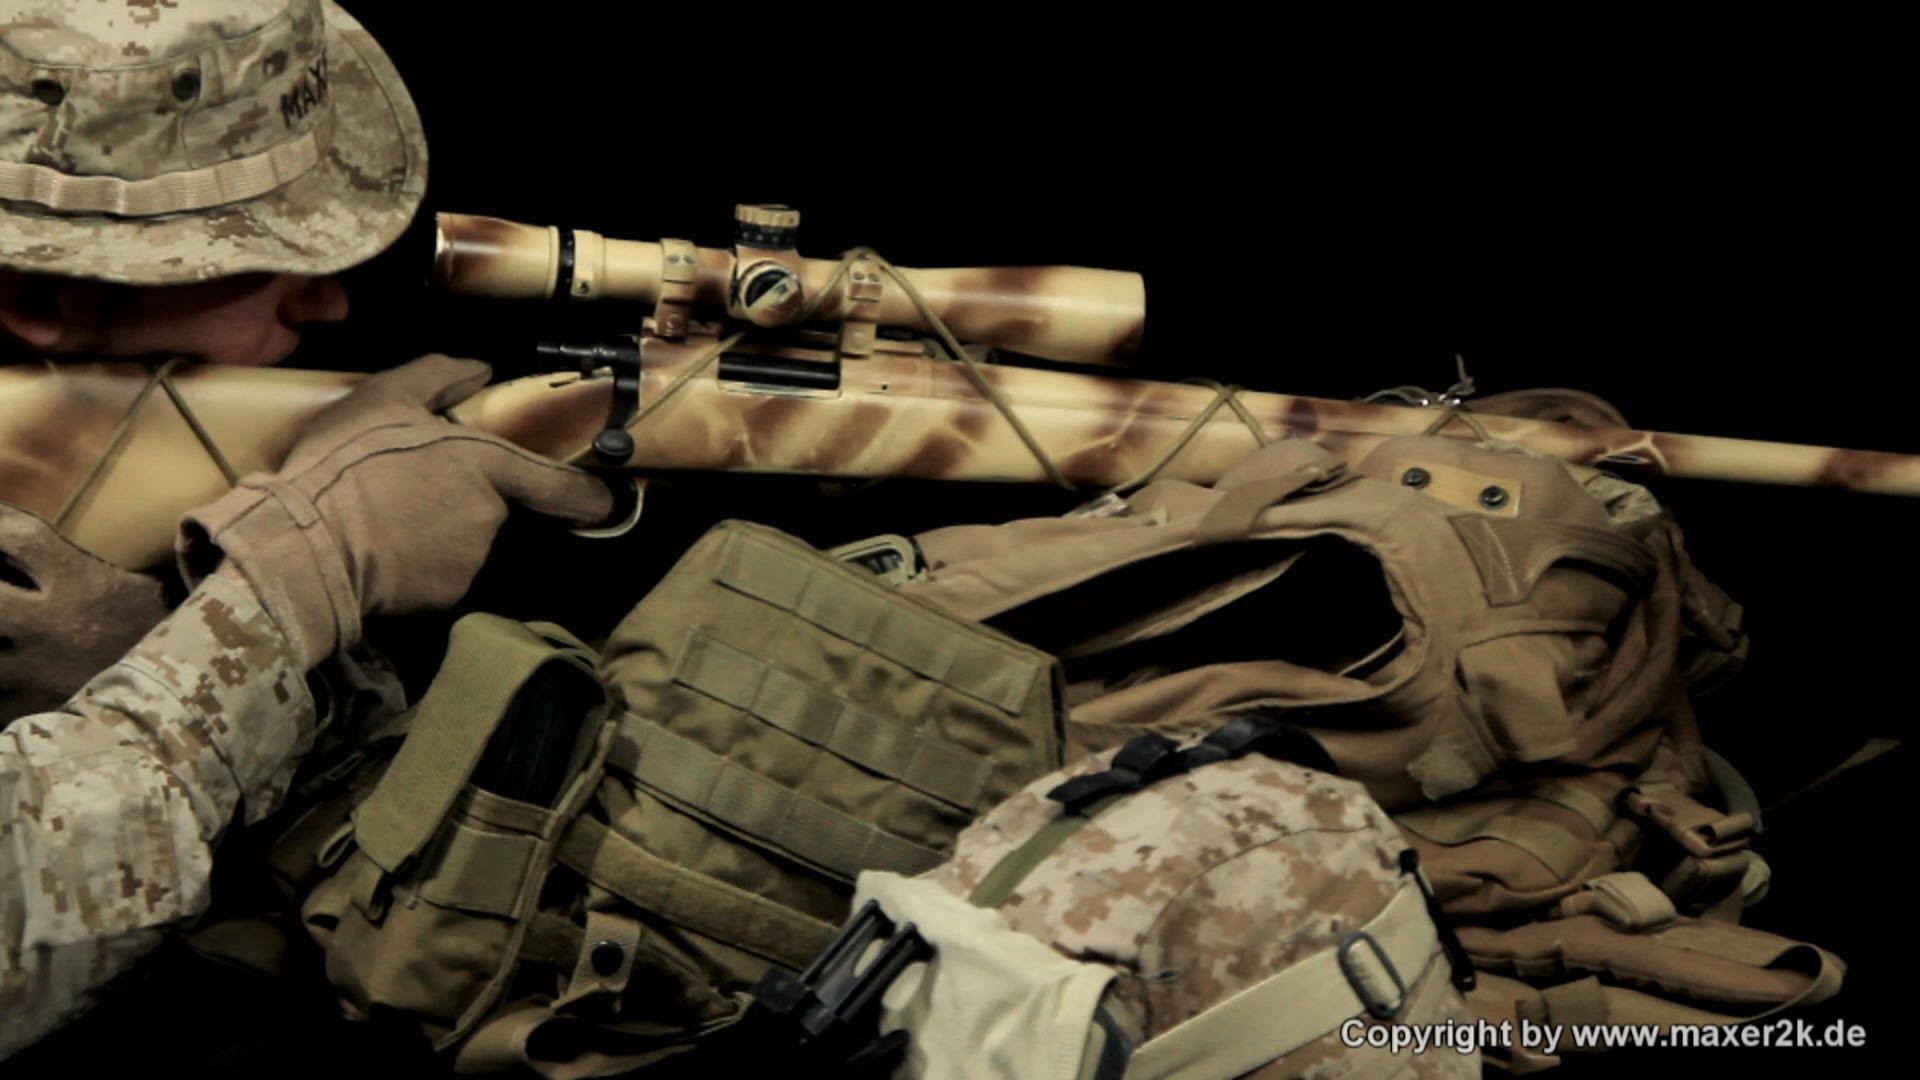 Displaying 20 Images For – Marine Scout Sniper Wallpaper